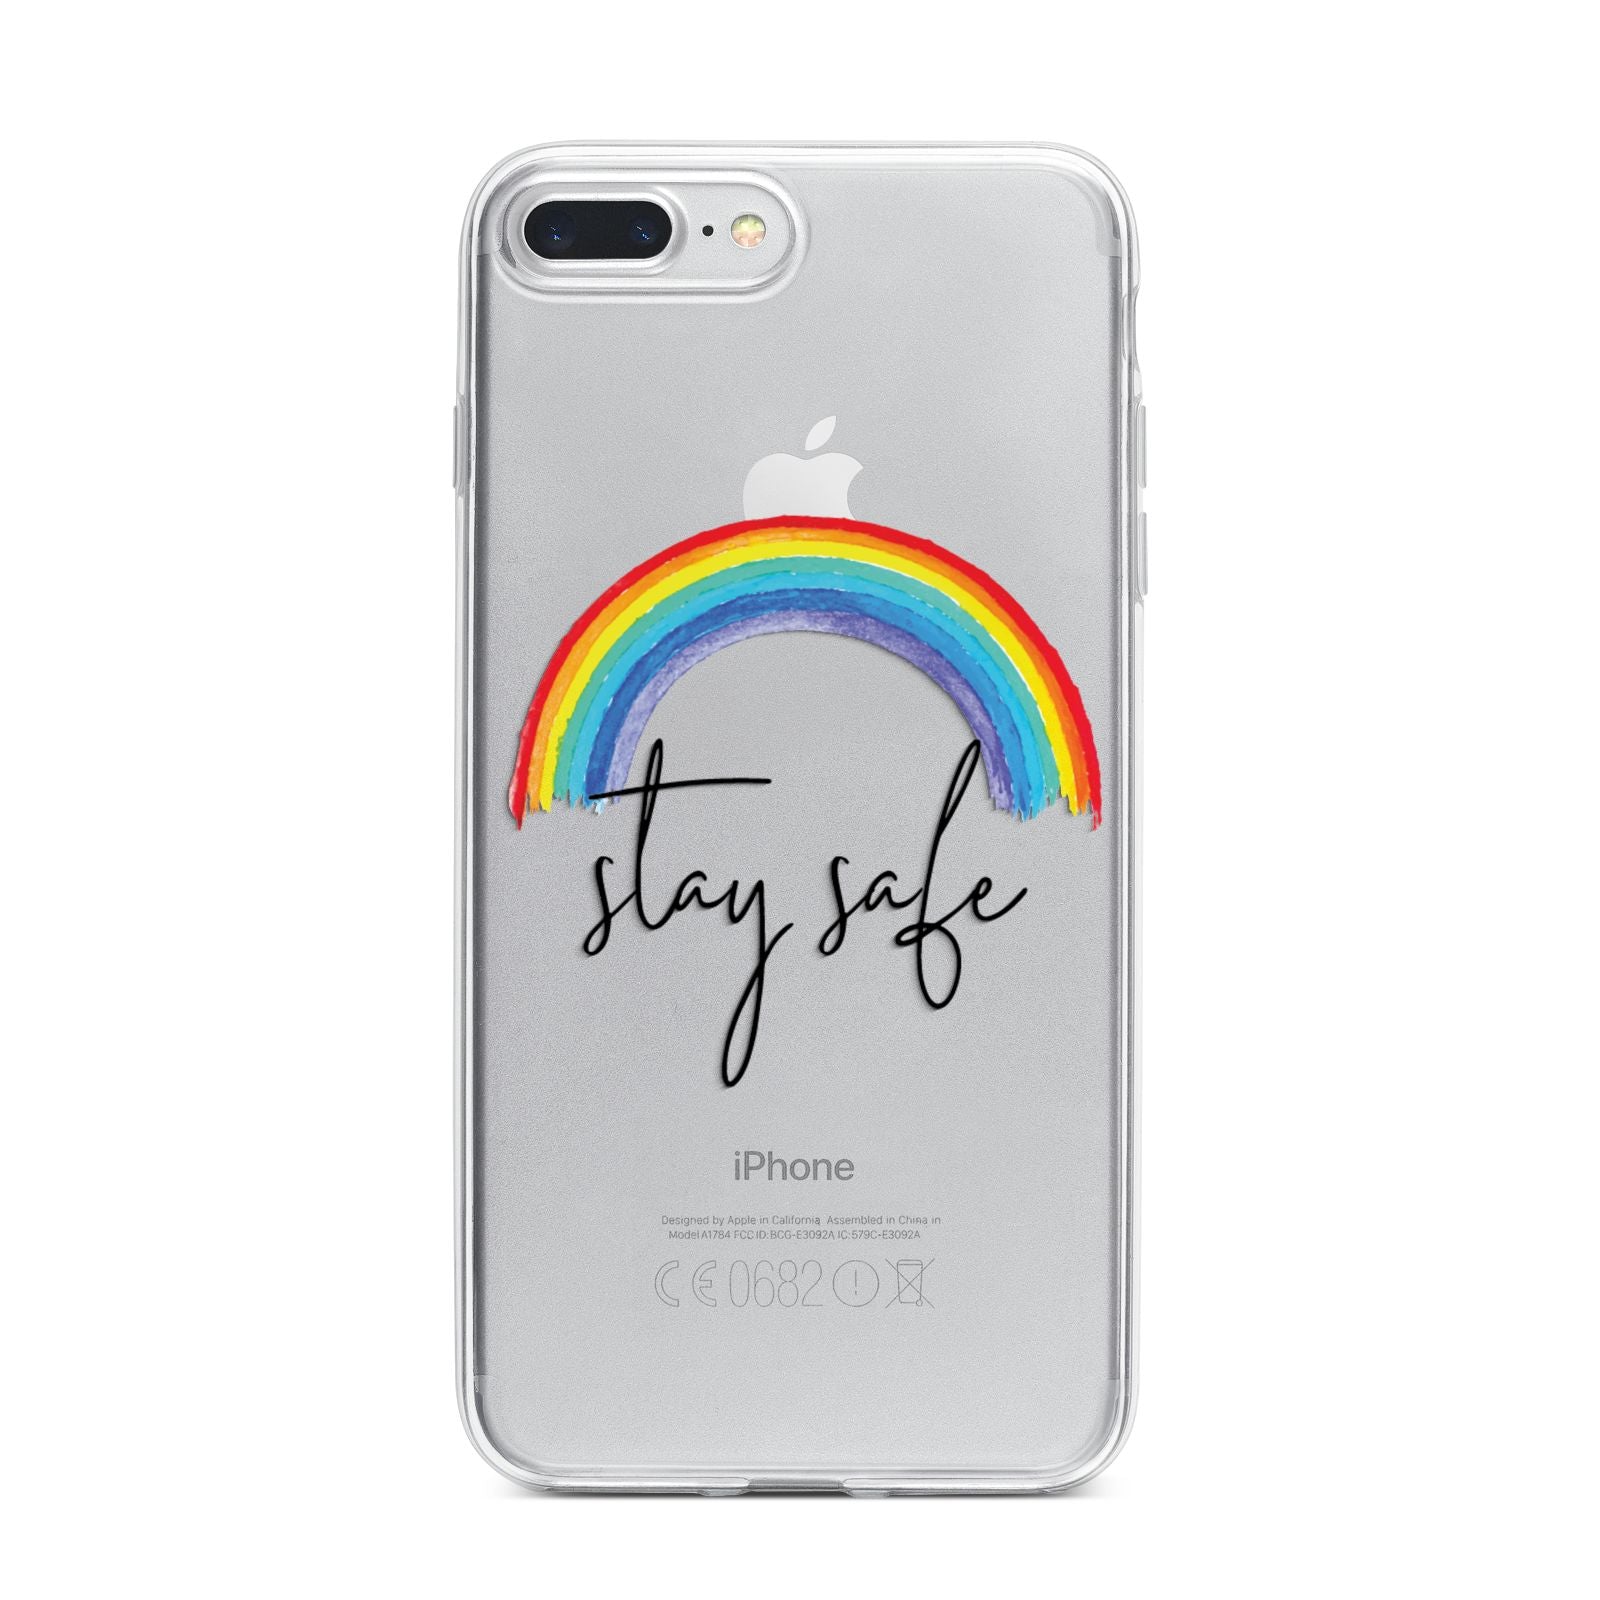 Stay Safe Rainbow iPhone 7 Plus Bumper Case on Silver iPhone